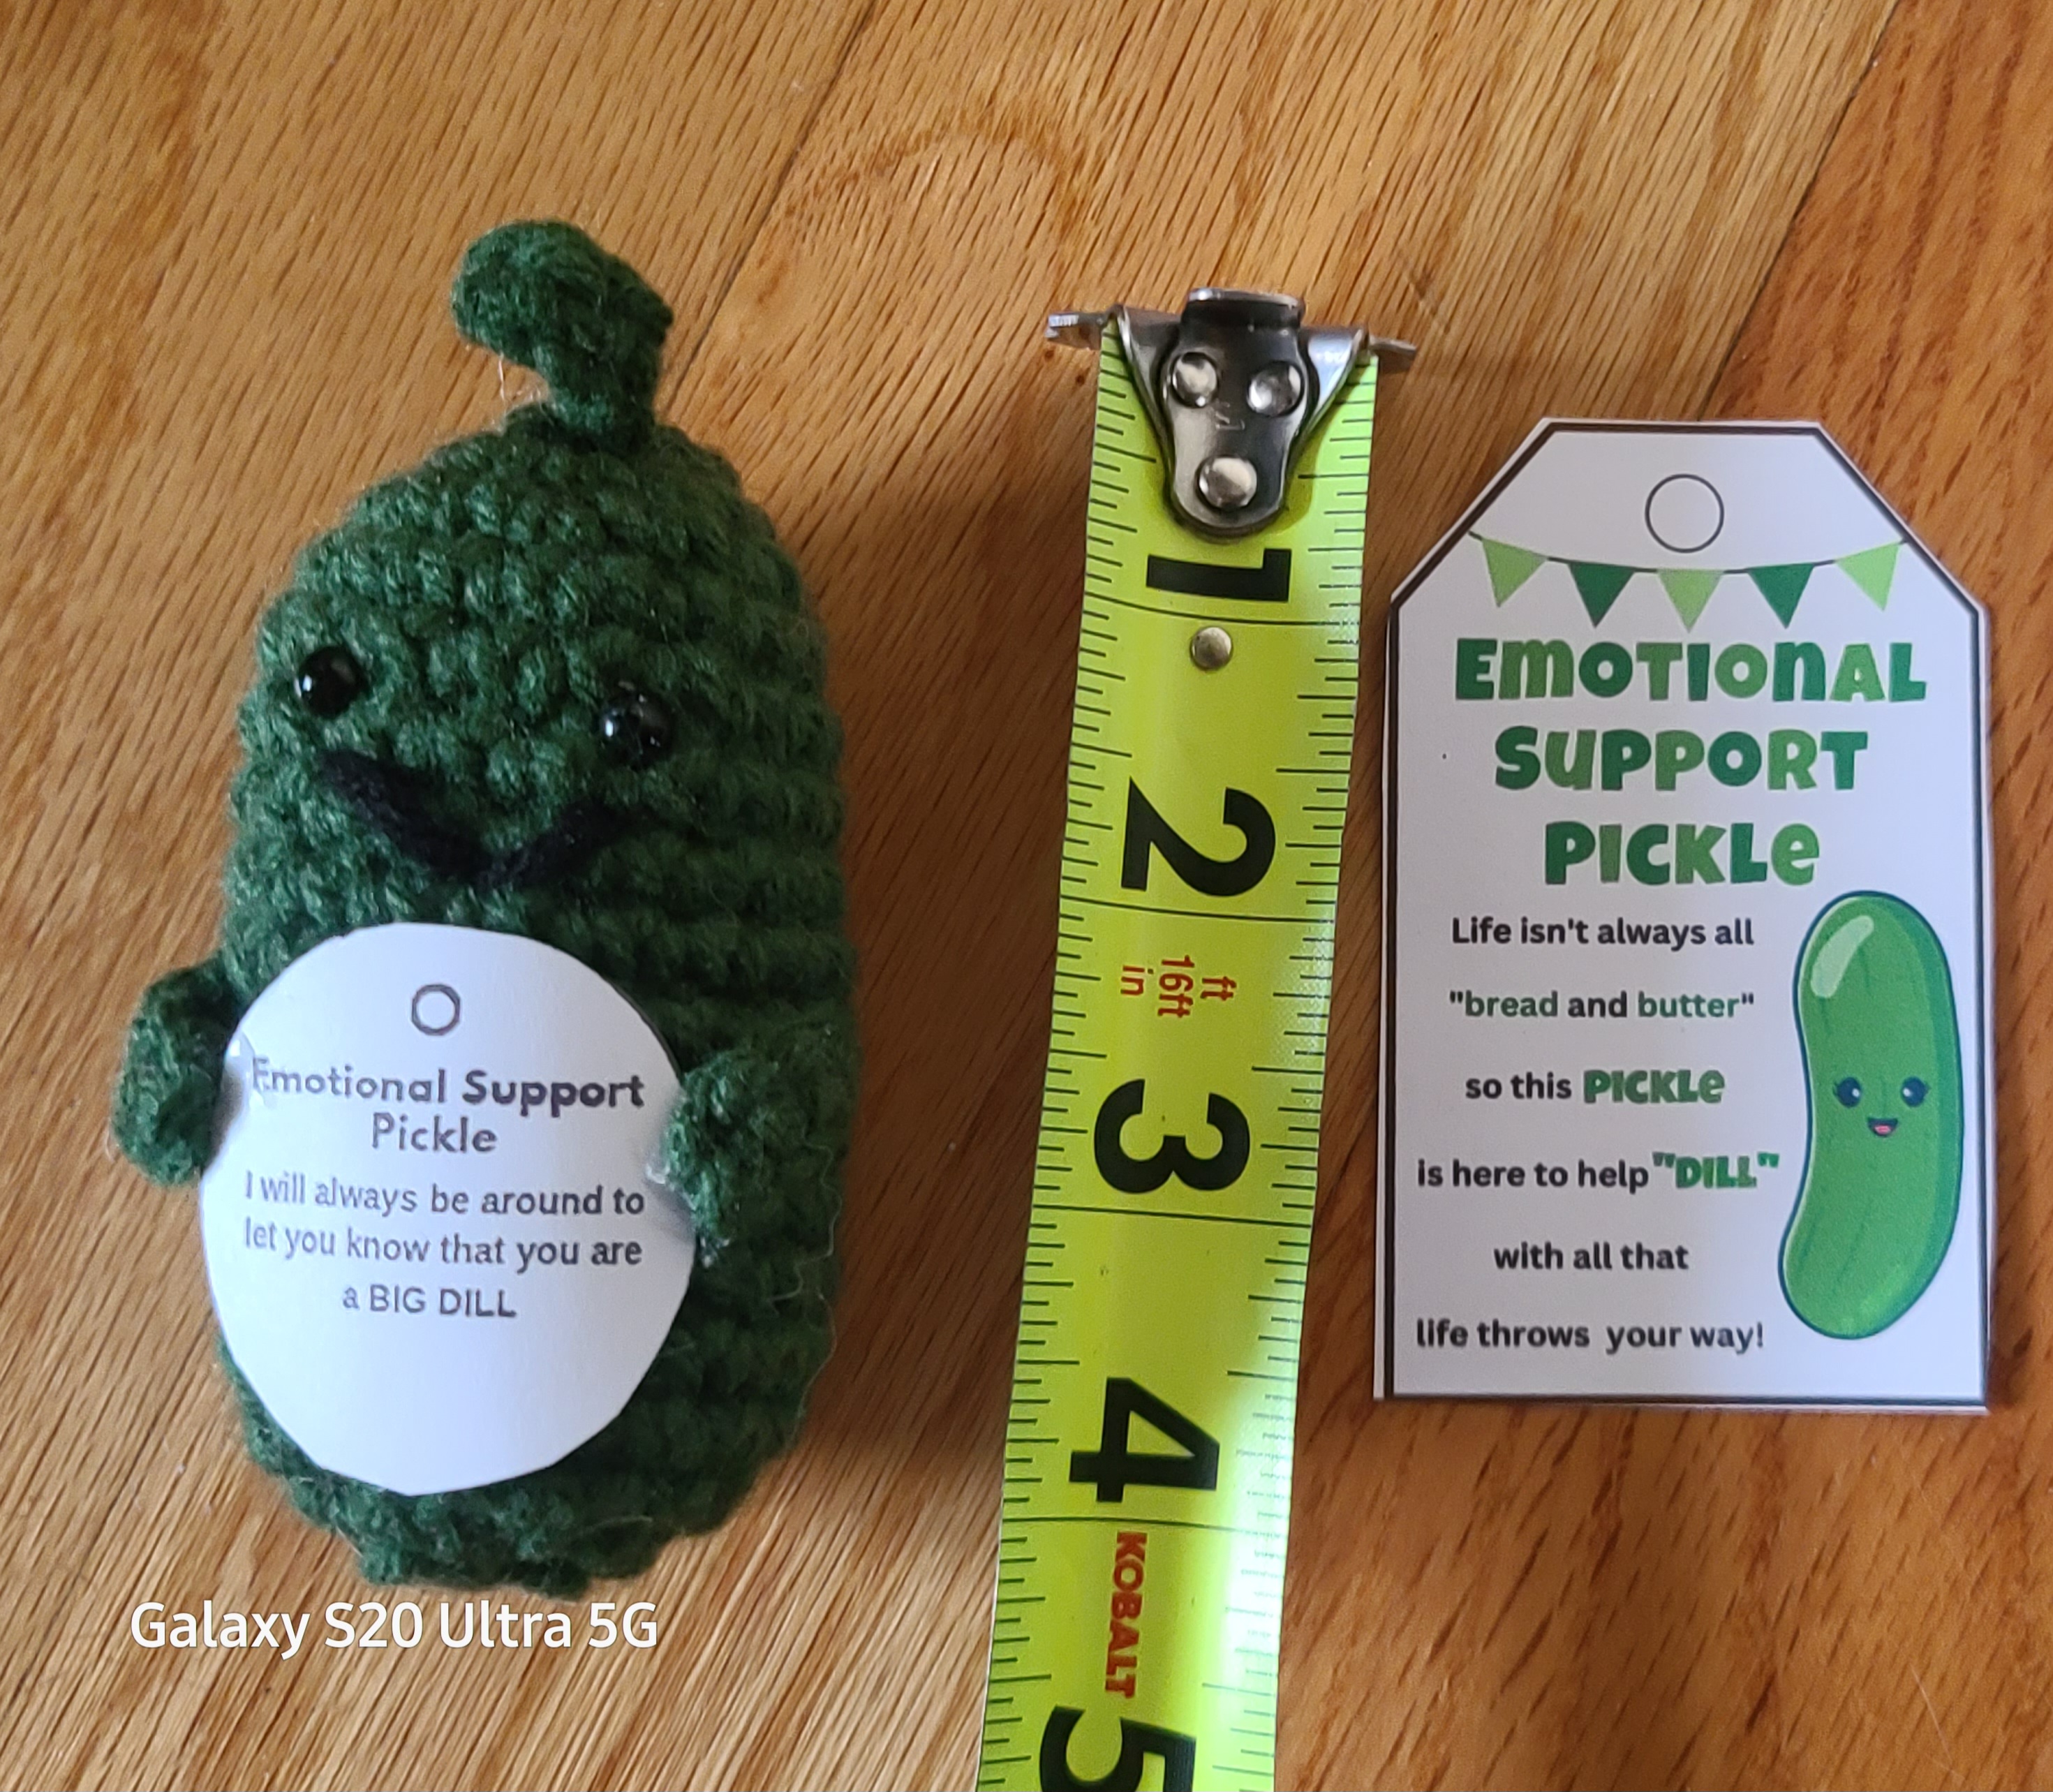 Crochet Pickle - Emotional Support Pickle with Tag, Best Gift For